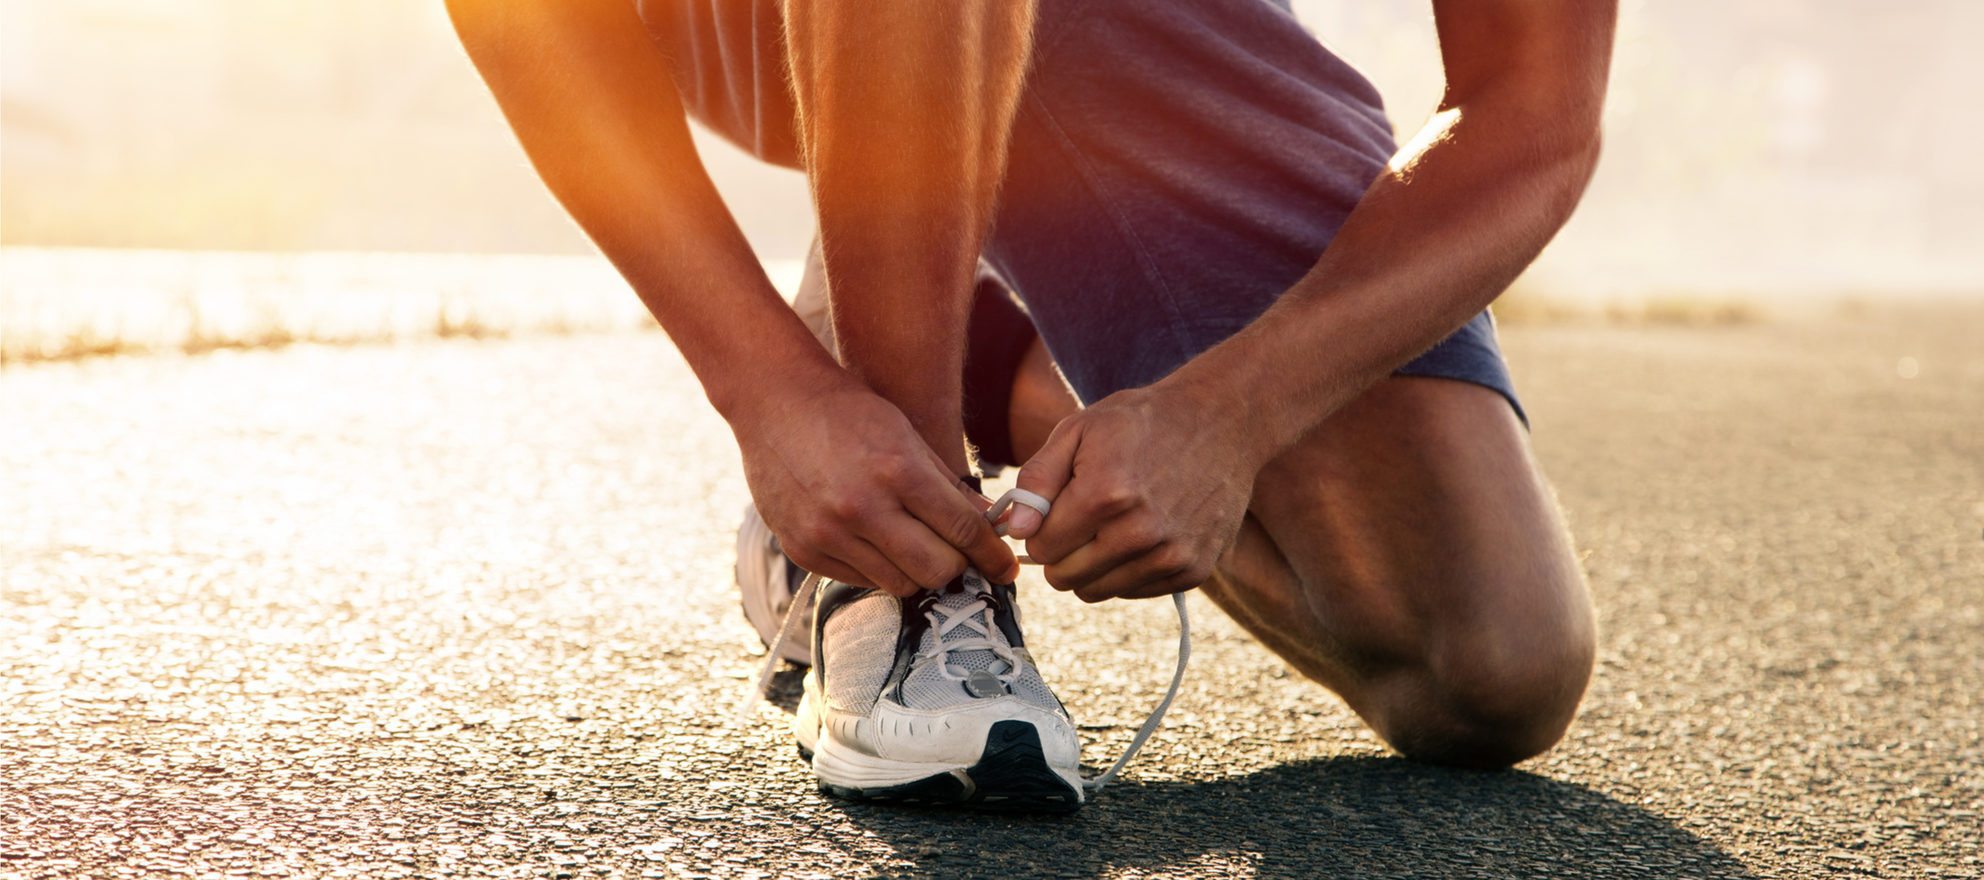 A man lacing up his shoes for a run